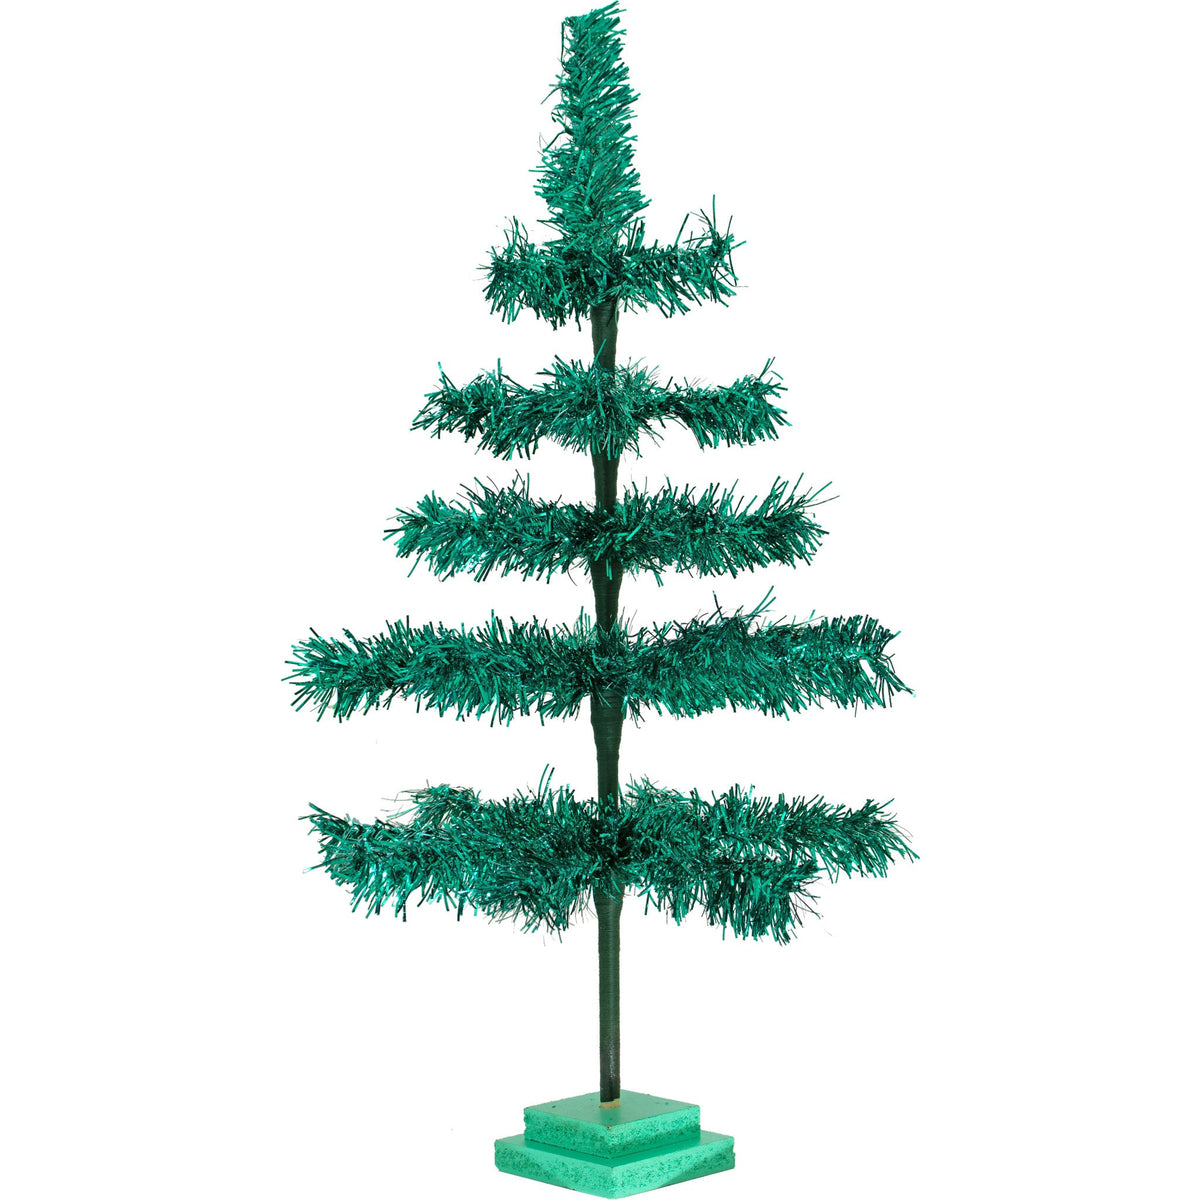 Introducing Lee Display's Limited Edition 28in Tall Vintage Emerald Green Tinsel Christmas Tree – a rare find from our archives, crafted over a decade ago and available in limited quantity.